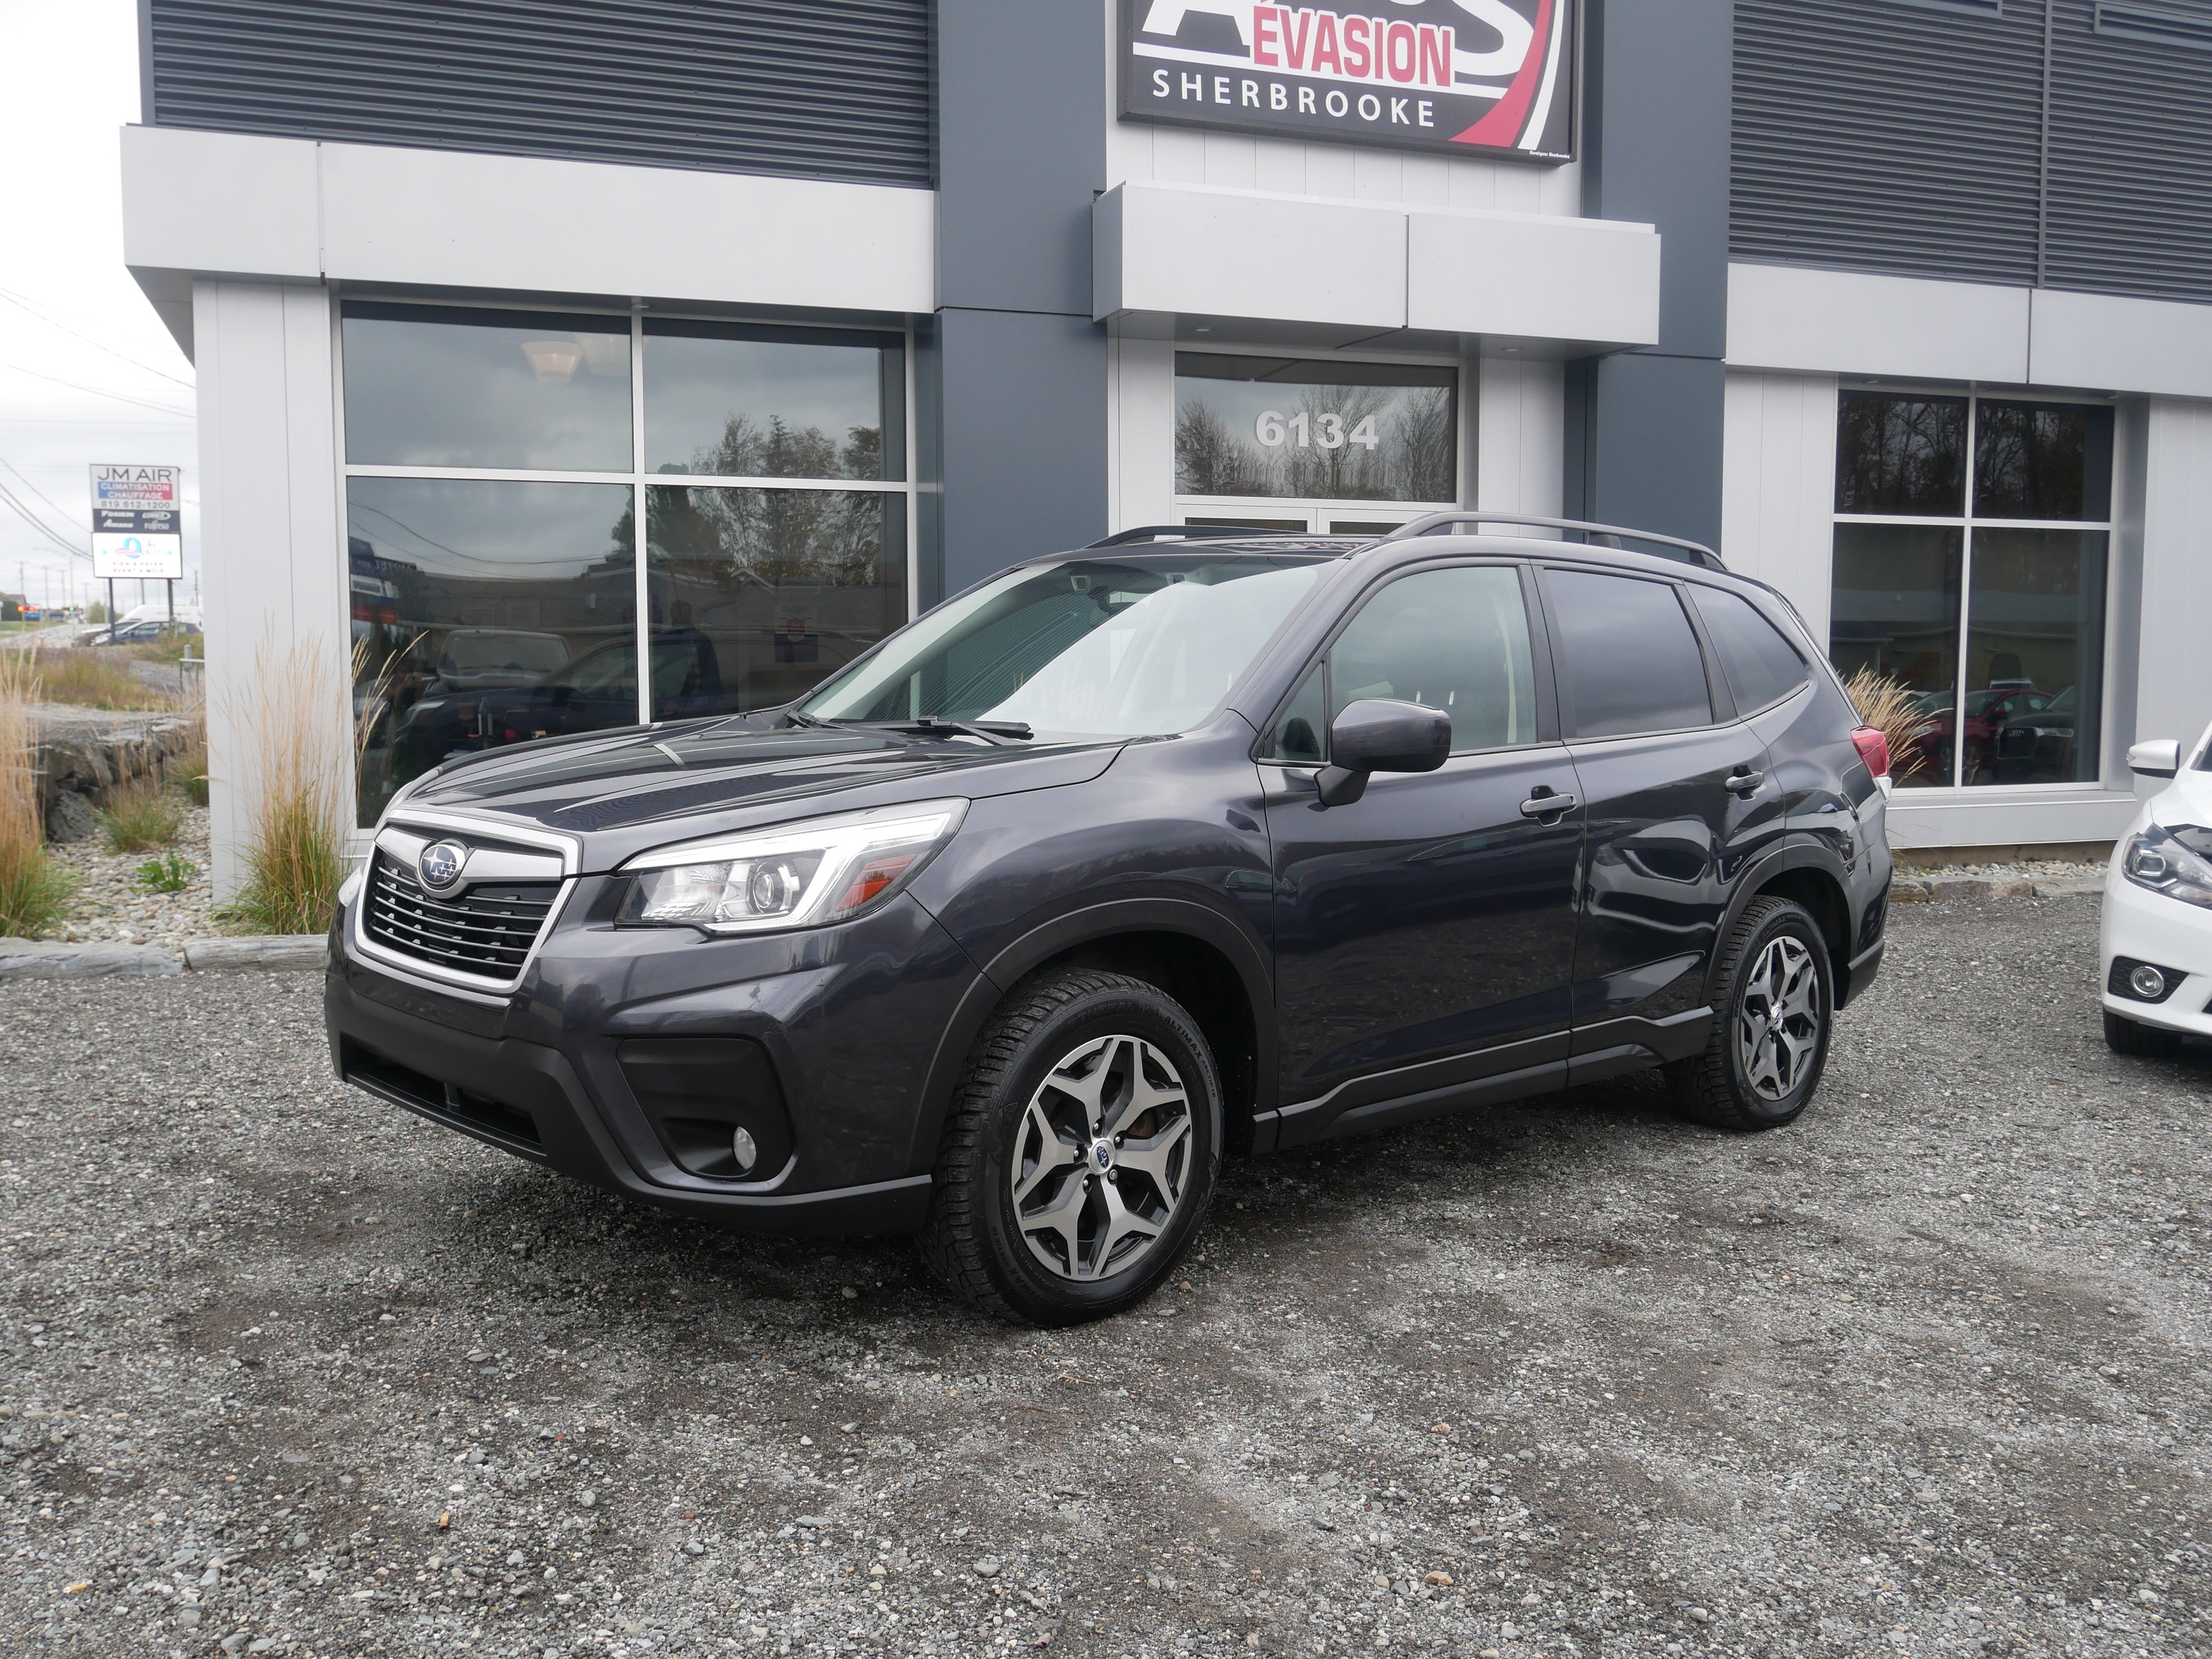 2019 Subaru Forester TOURING AWD + EYES PACKAGE + TOIT + UN PROPRIO